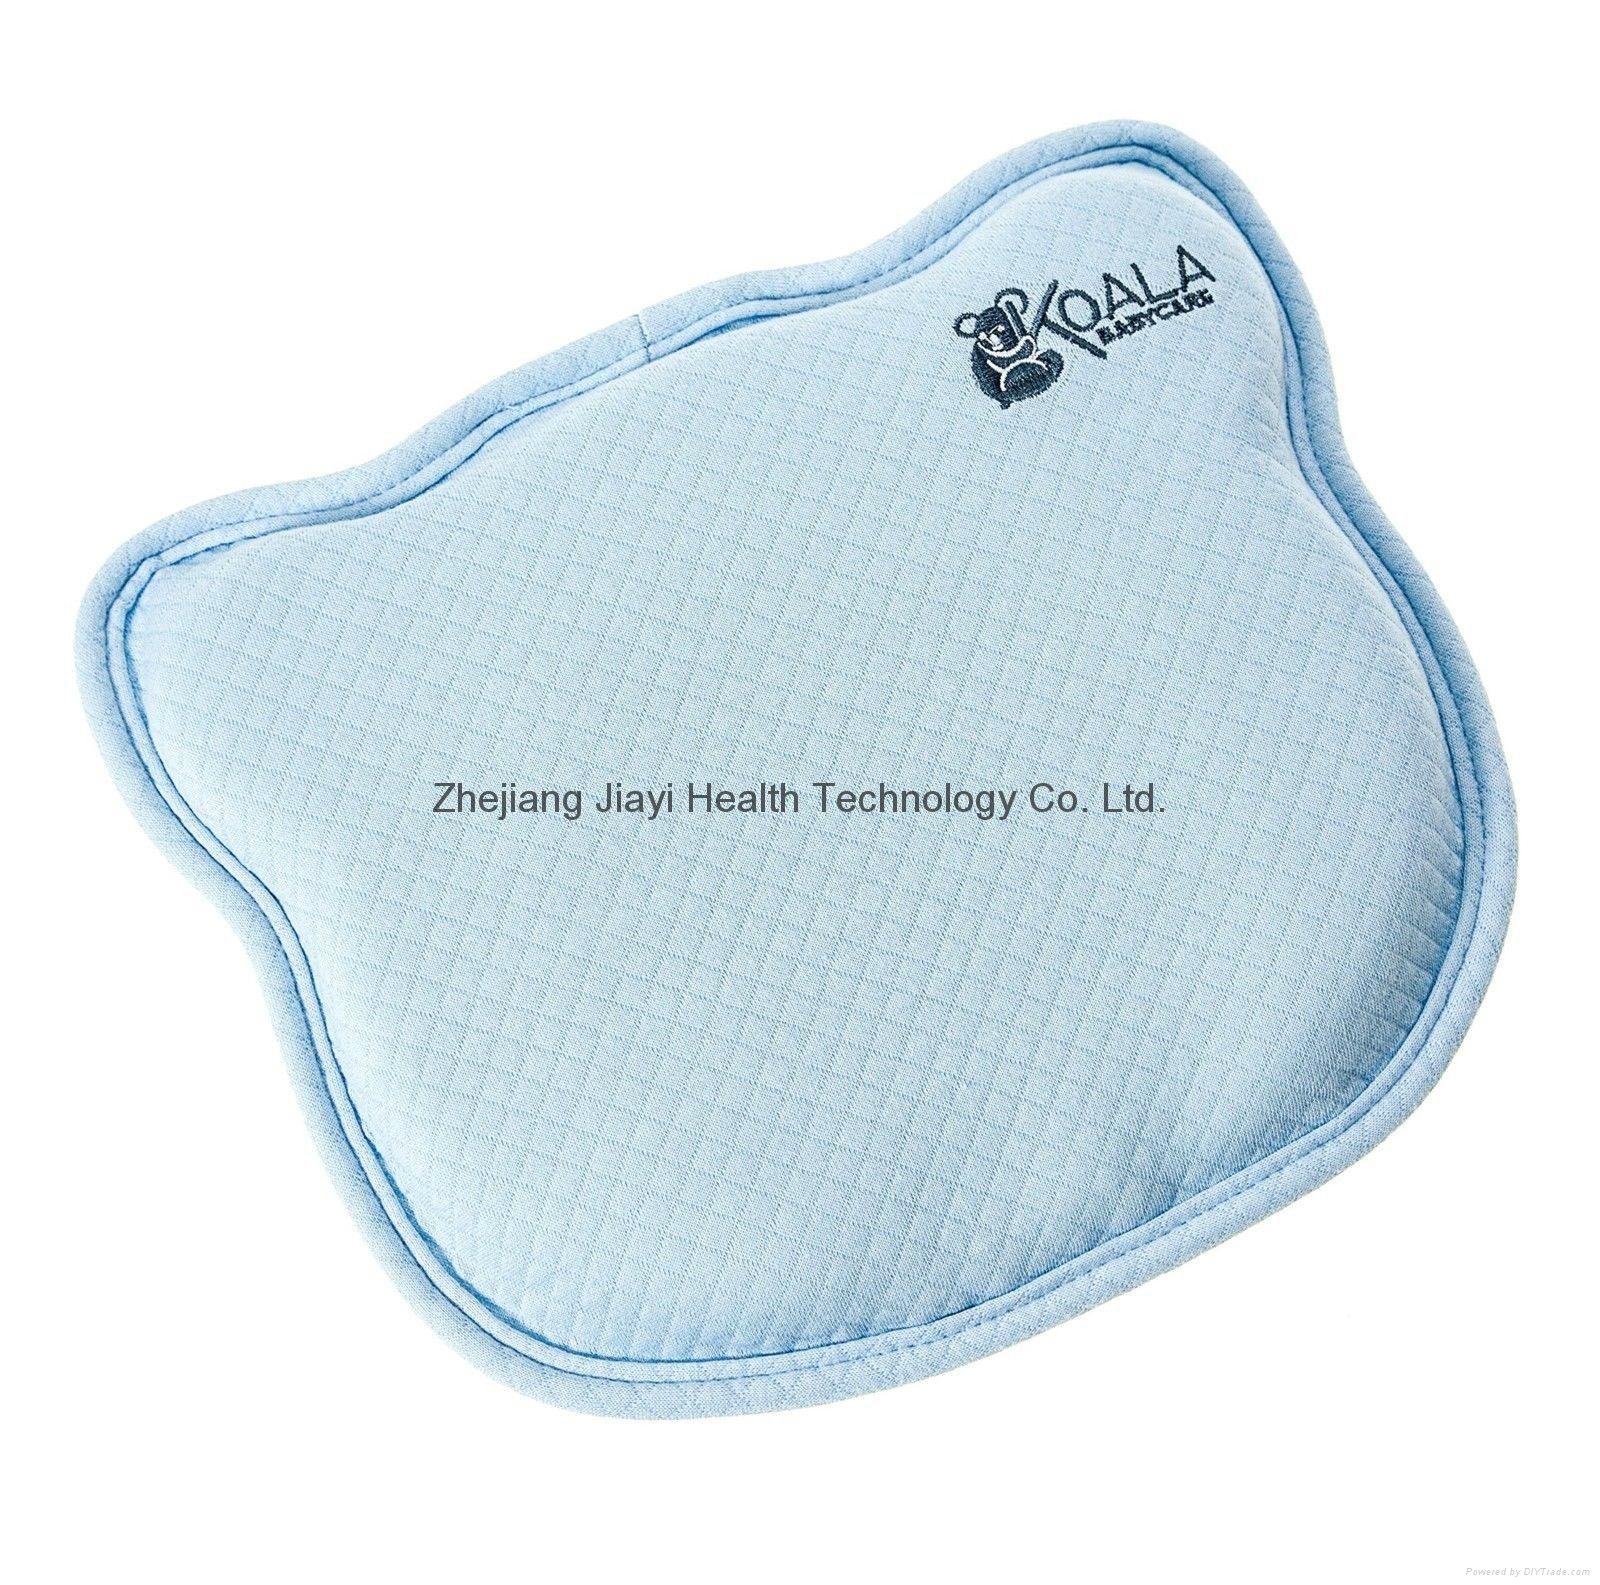 Orthopedic Flat Head Baby Pillow w 2 Removable Covers Toddler Care Cushion Blue  5